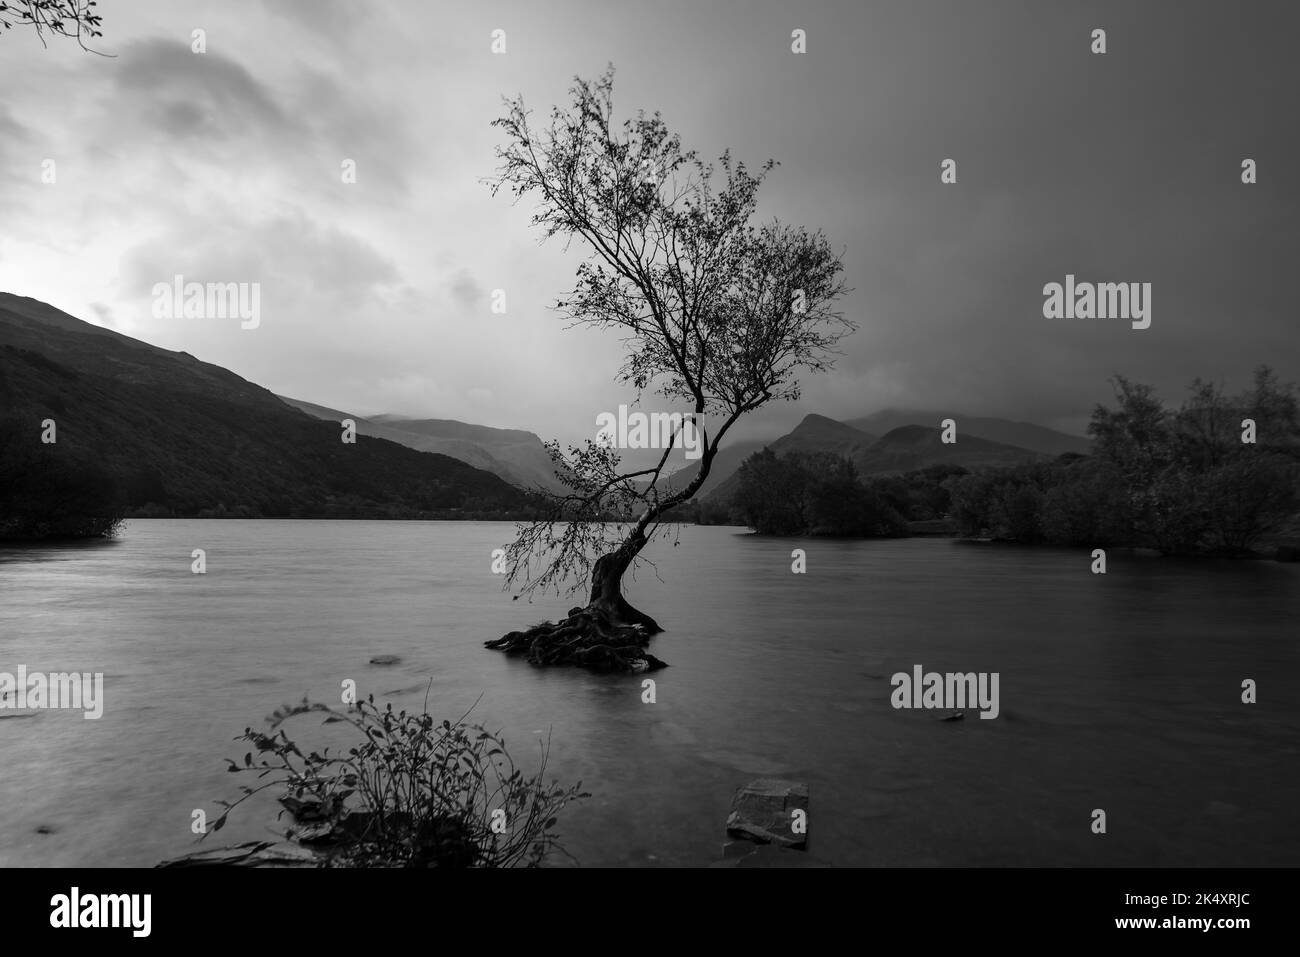 Lone Tree in Snowdonia sitting in water with Mountains in the background in Black and White,  taken at sunrise Stock Photo